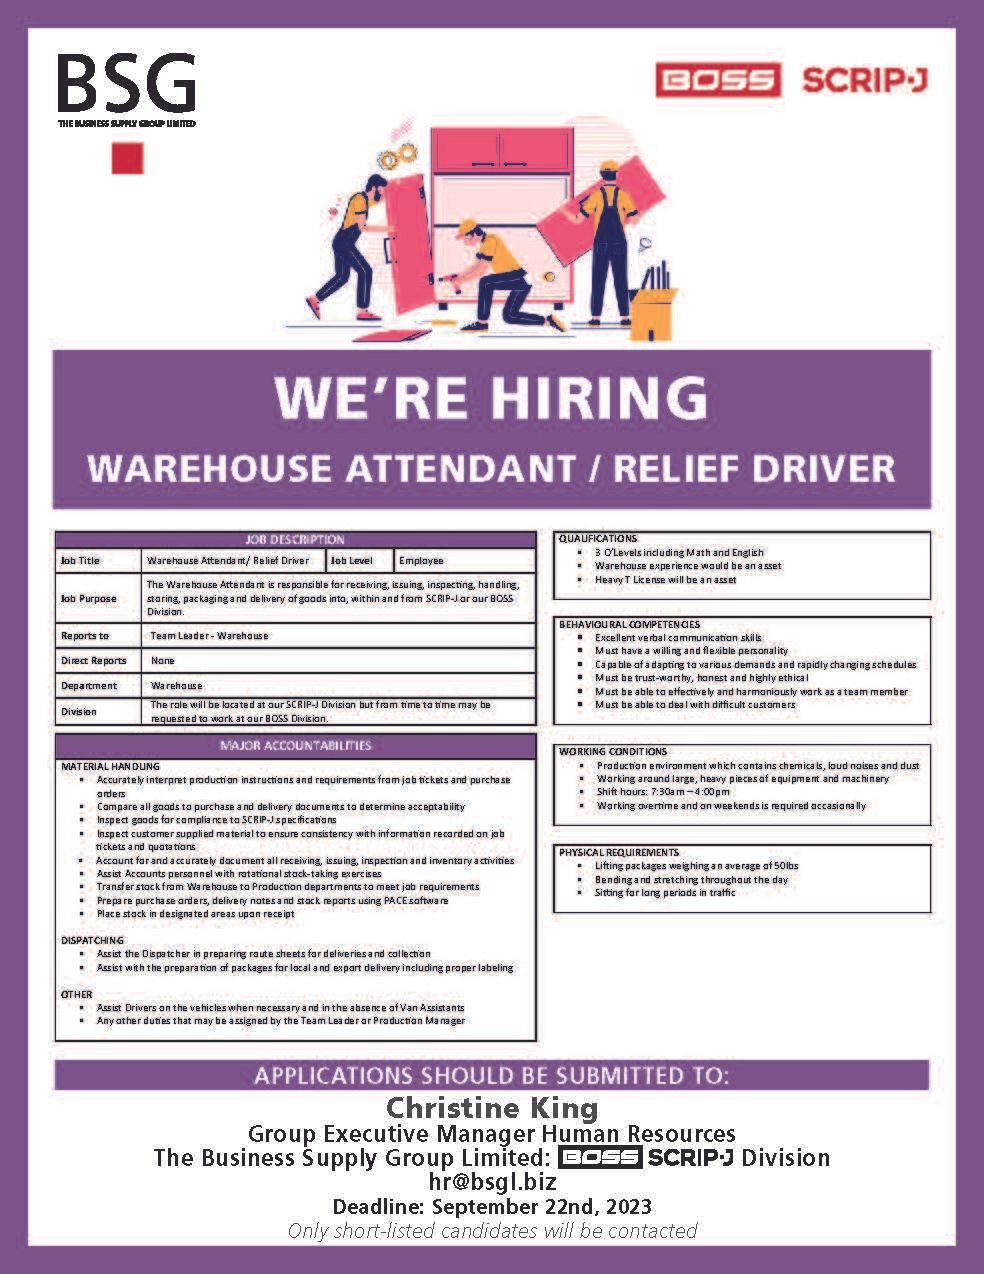 Warehouse Attendant - Relief Driver